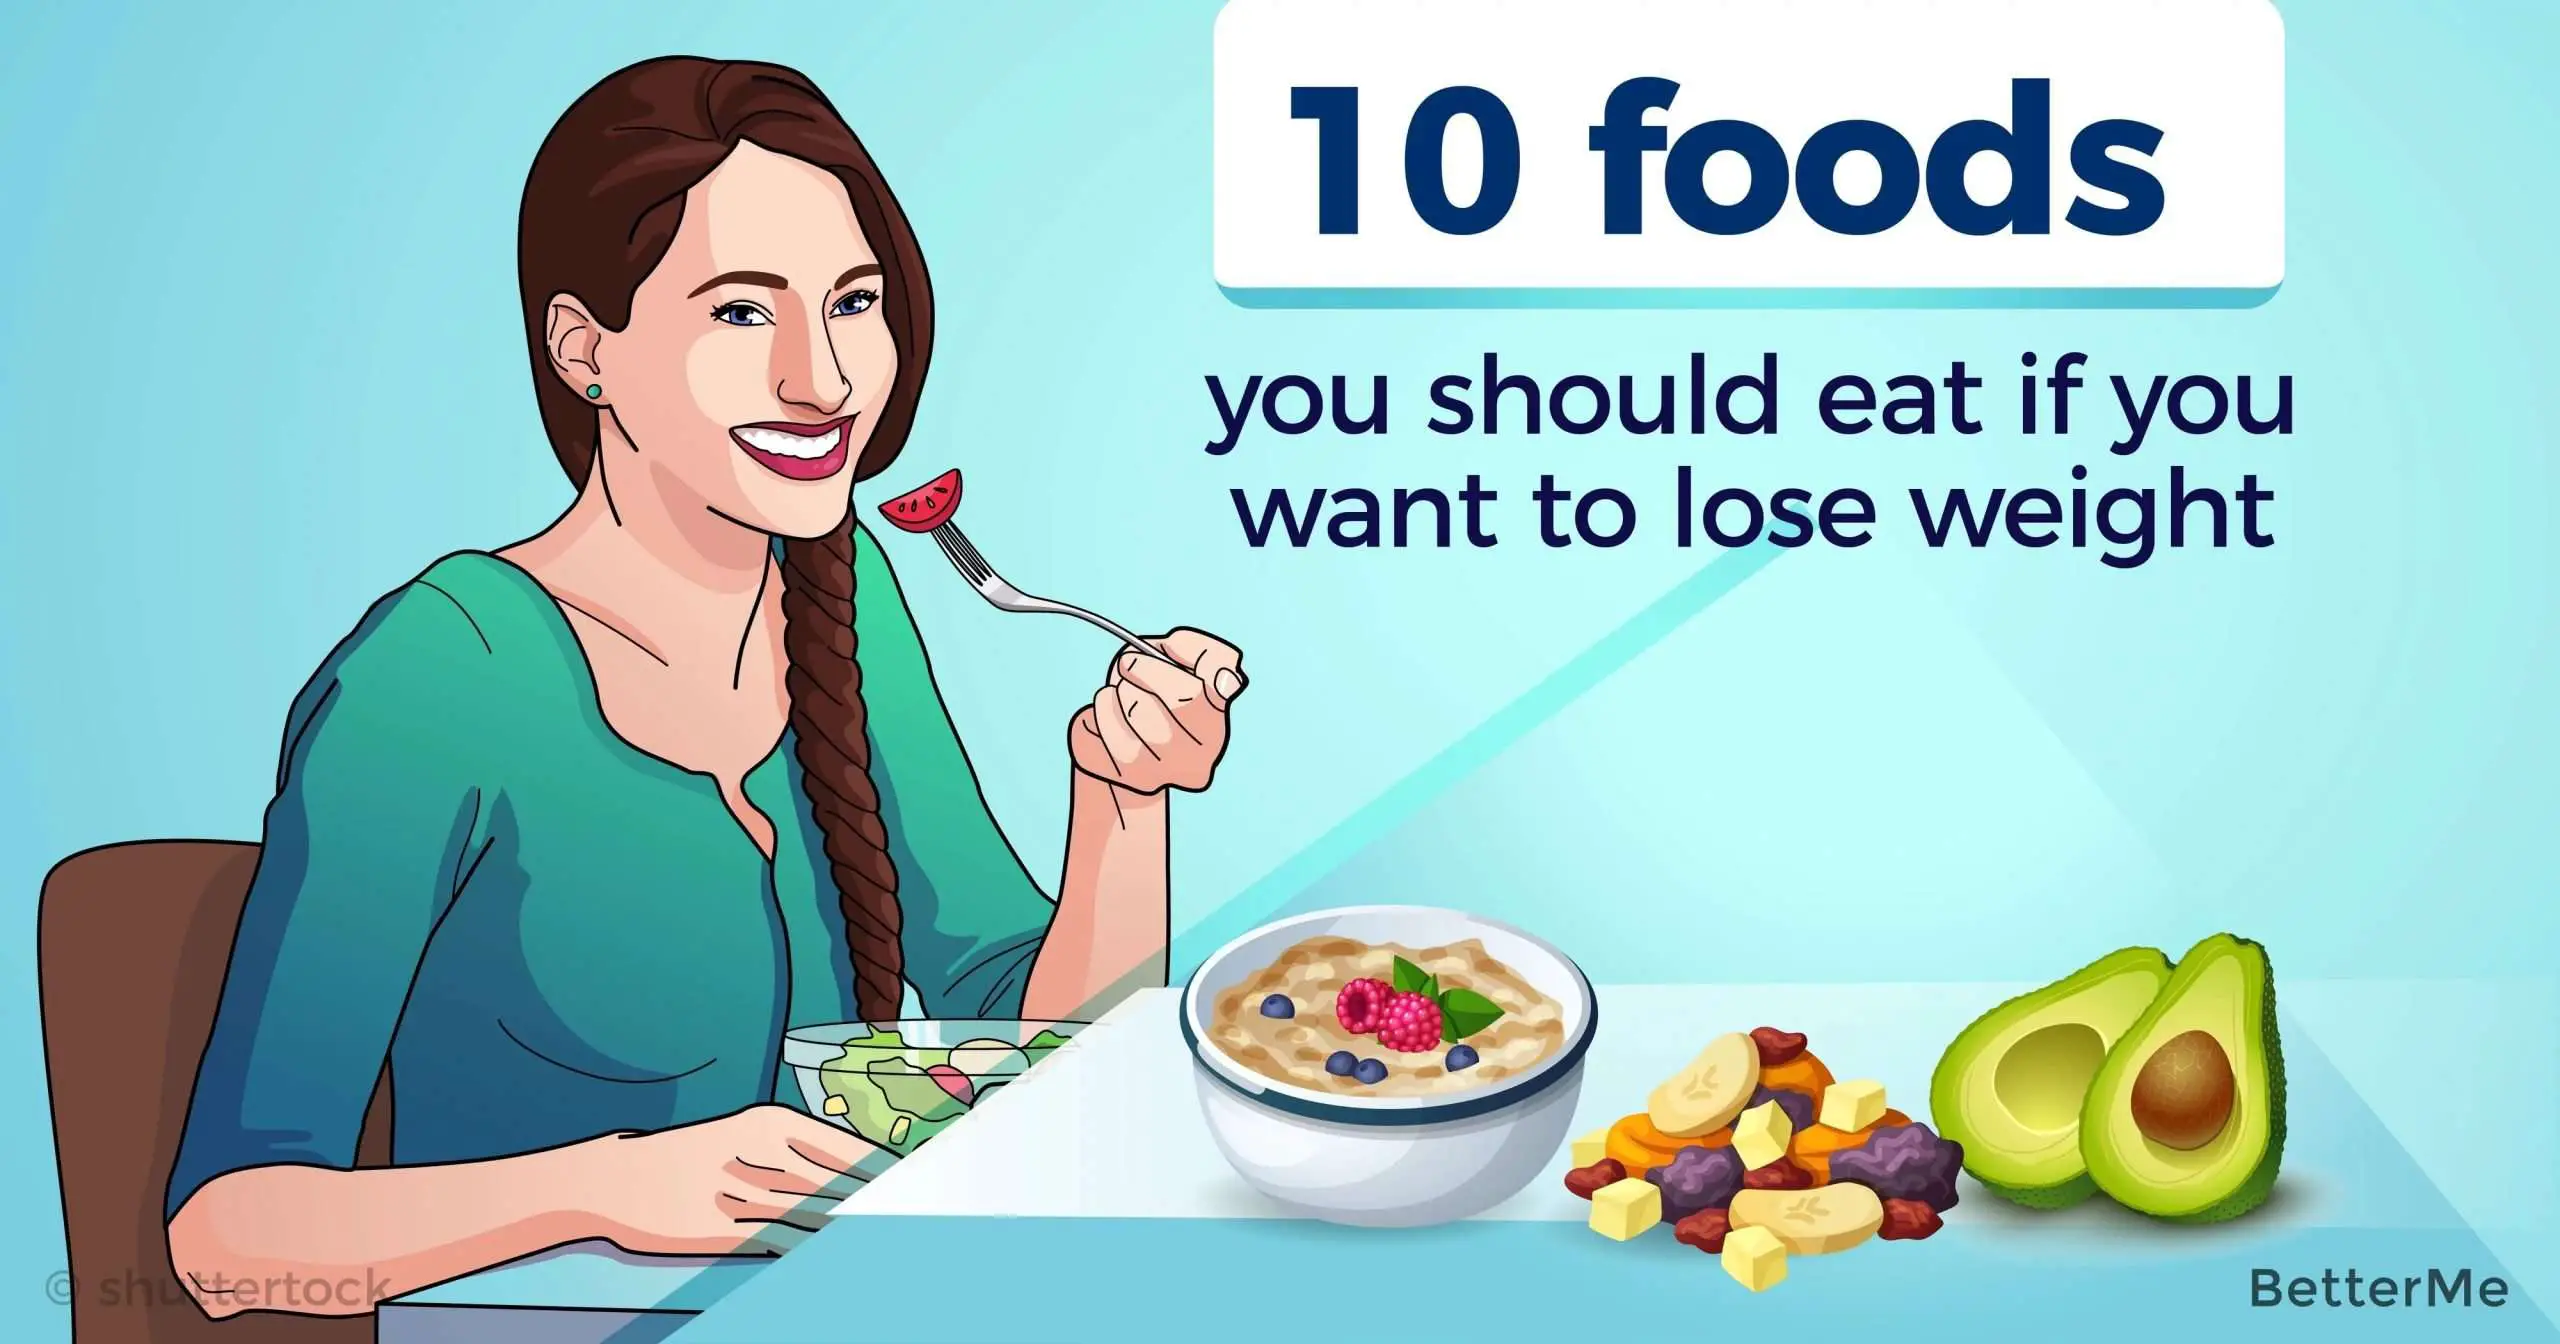 10 foods you should eat if you want to lose weight